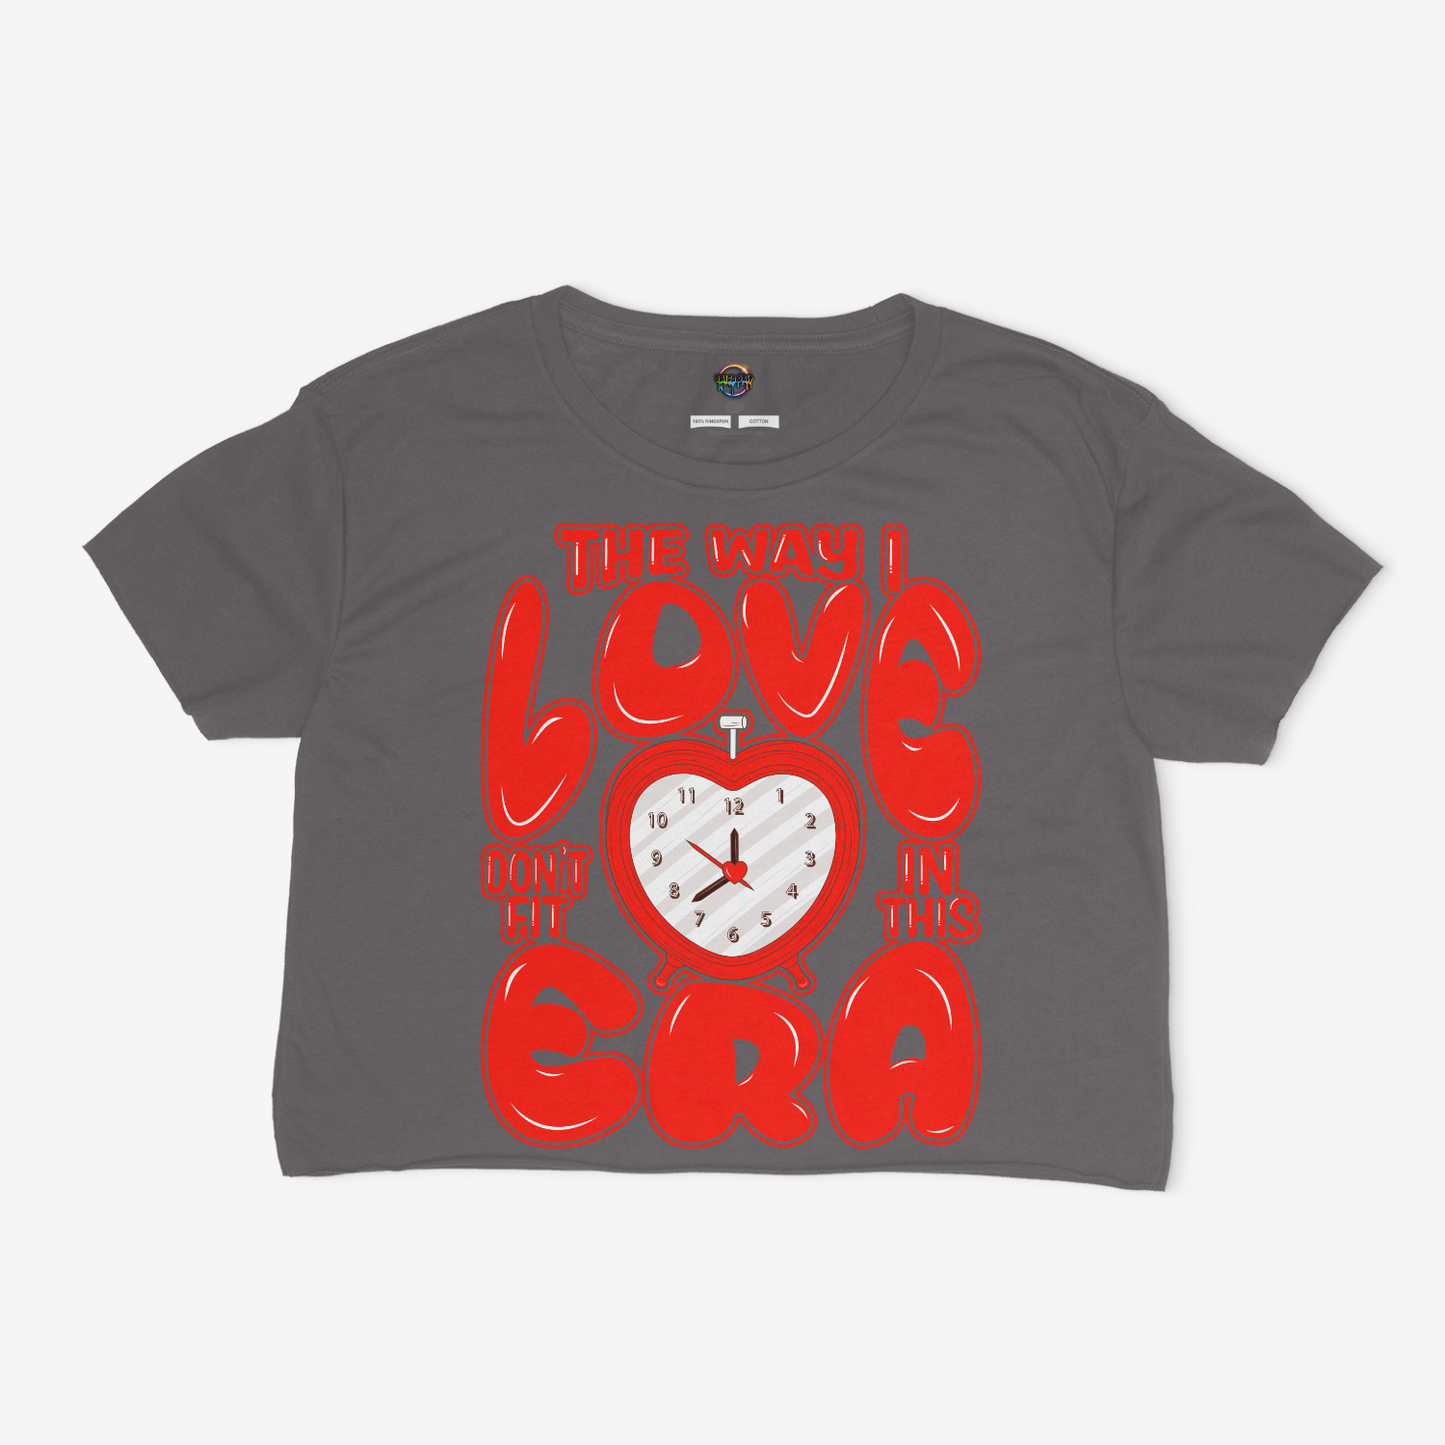 The Way I Love Don't Fit in This Era Cropped Relaxed Fit Graphic T-Shirt